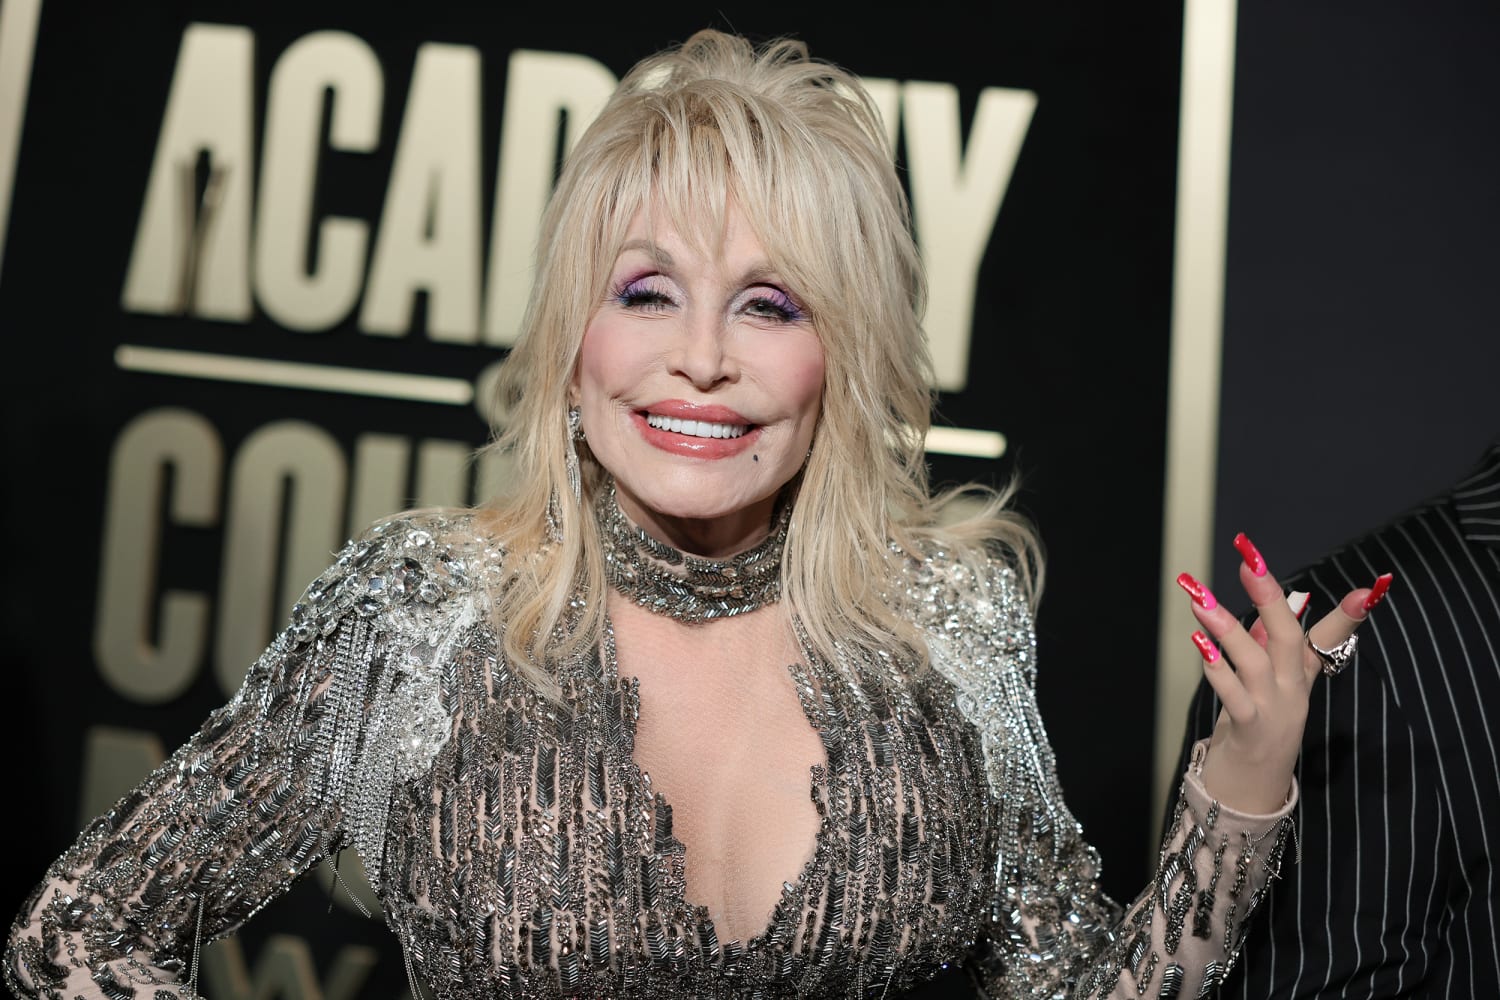 Dolly Parton Wants to Reunite Led Zeppelin on Her Rock Album